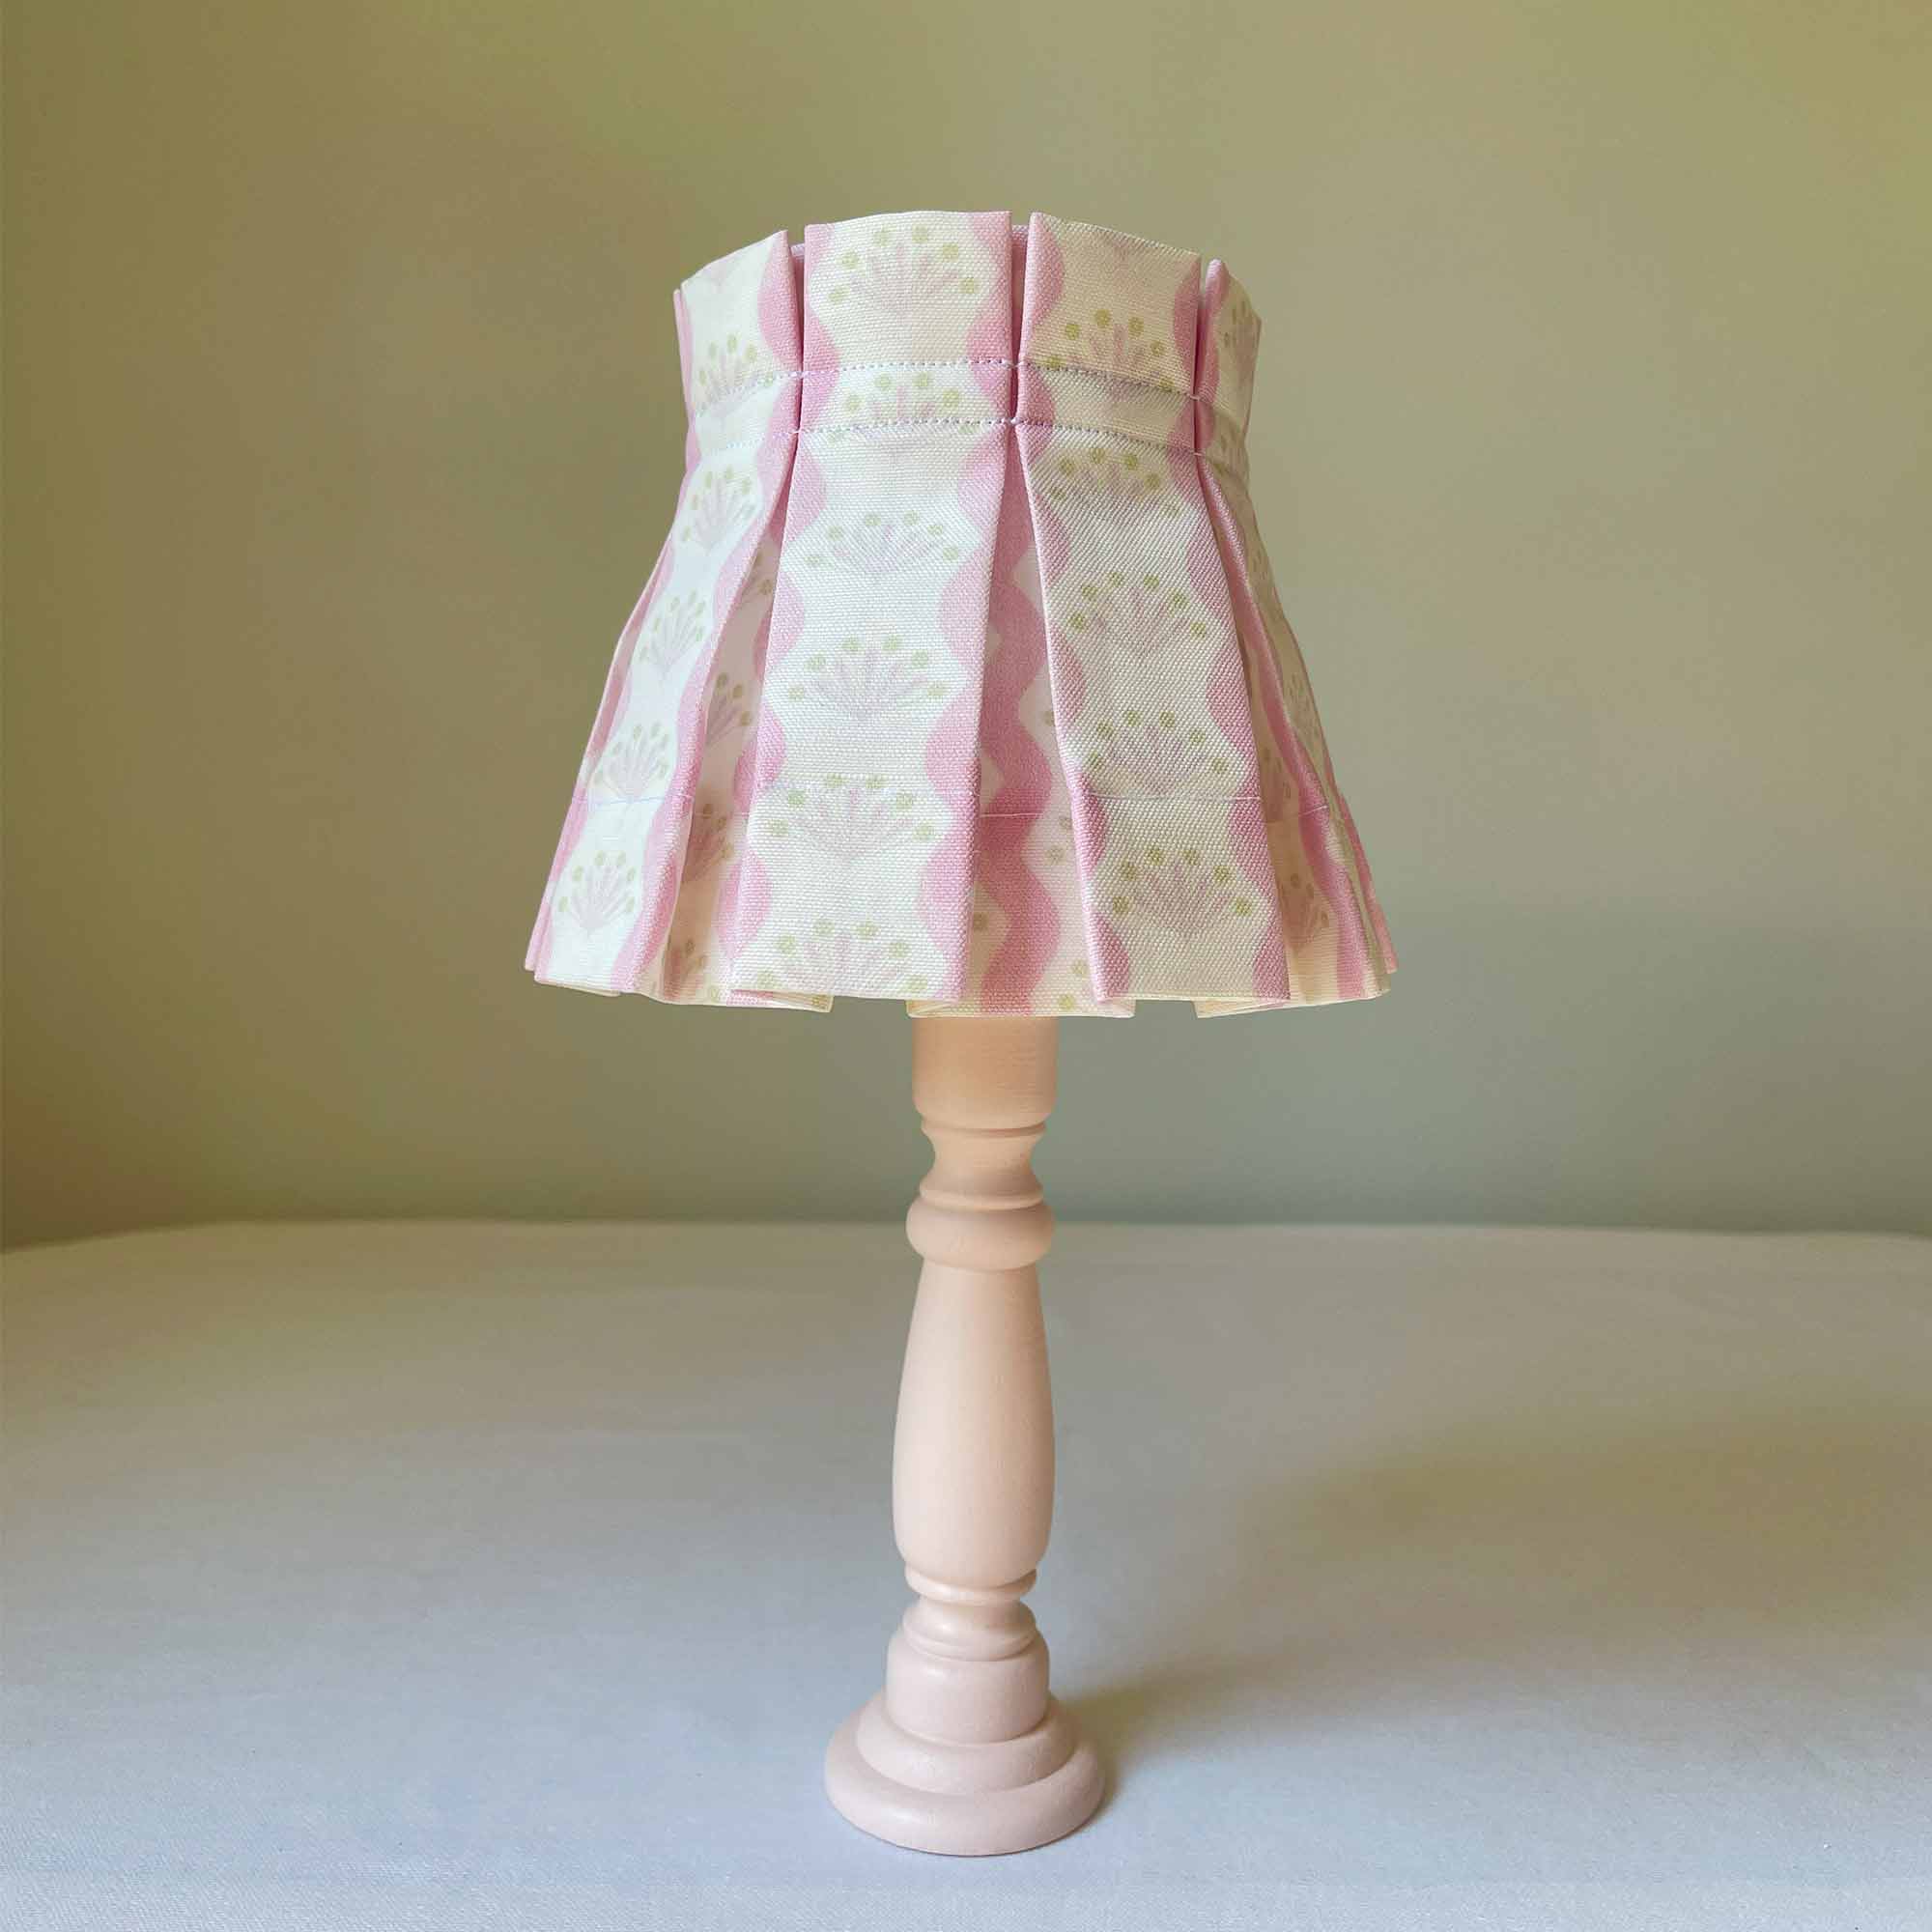 little pink floral lampshade with curvy stripes designed with candle clip-on fitter and good for girls rooms wall sconce and bedside lights